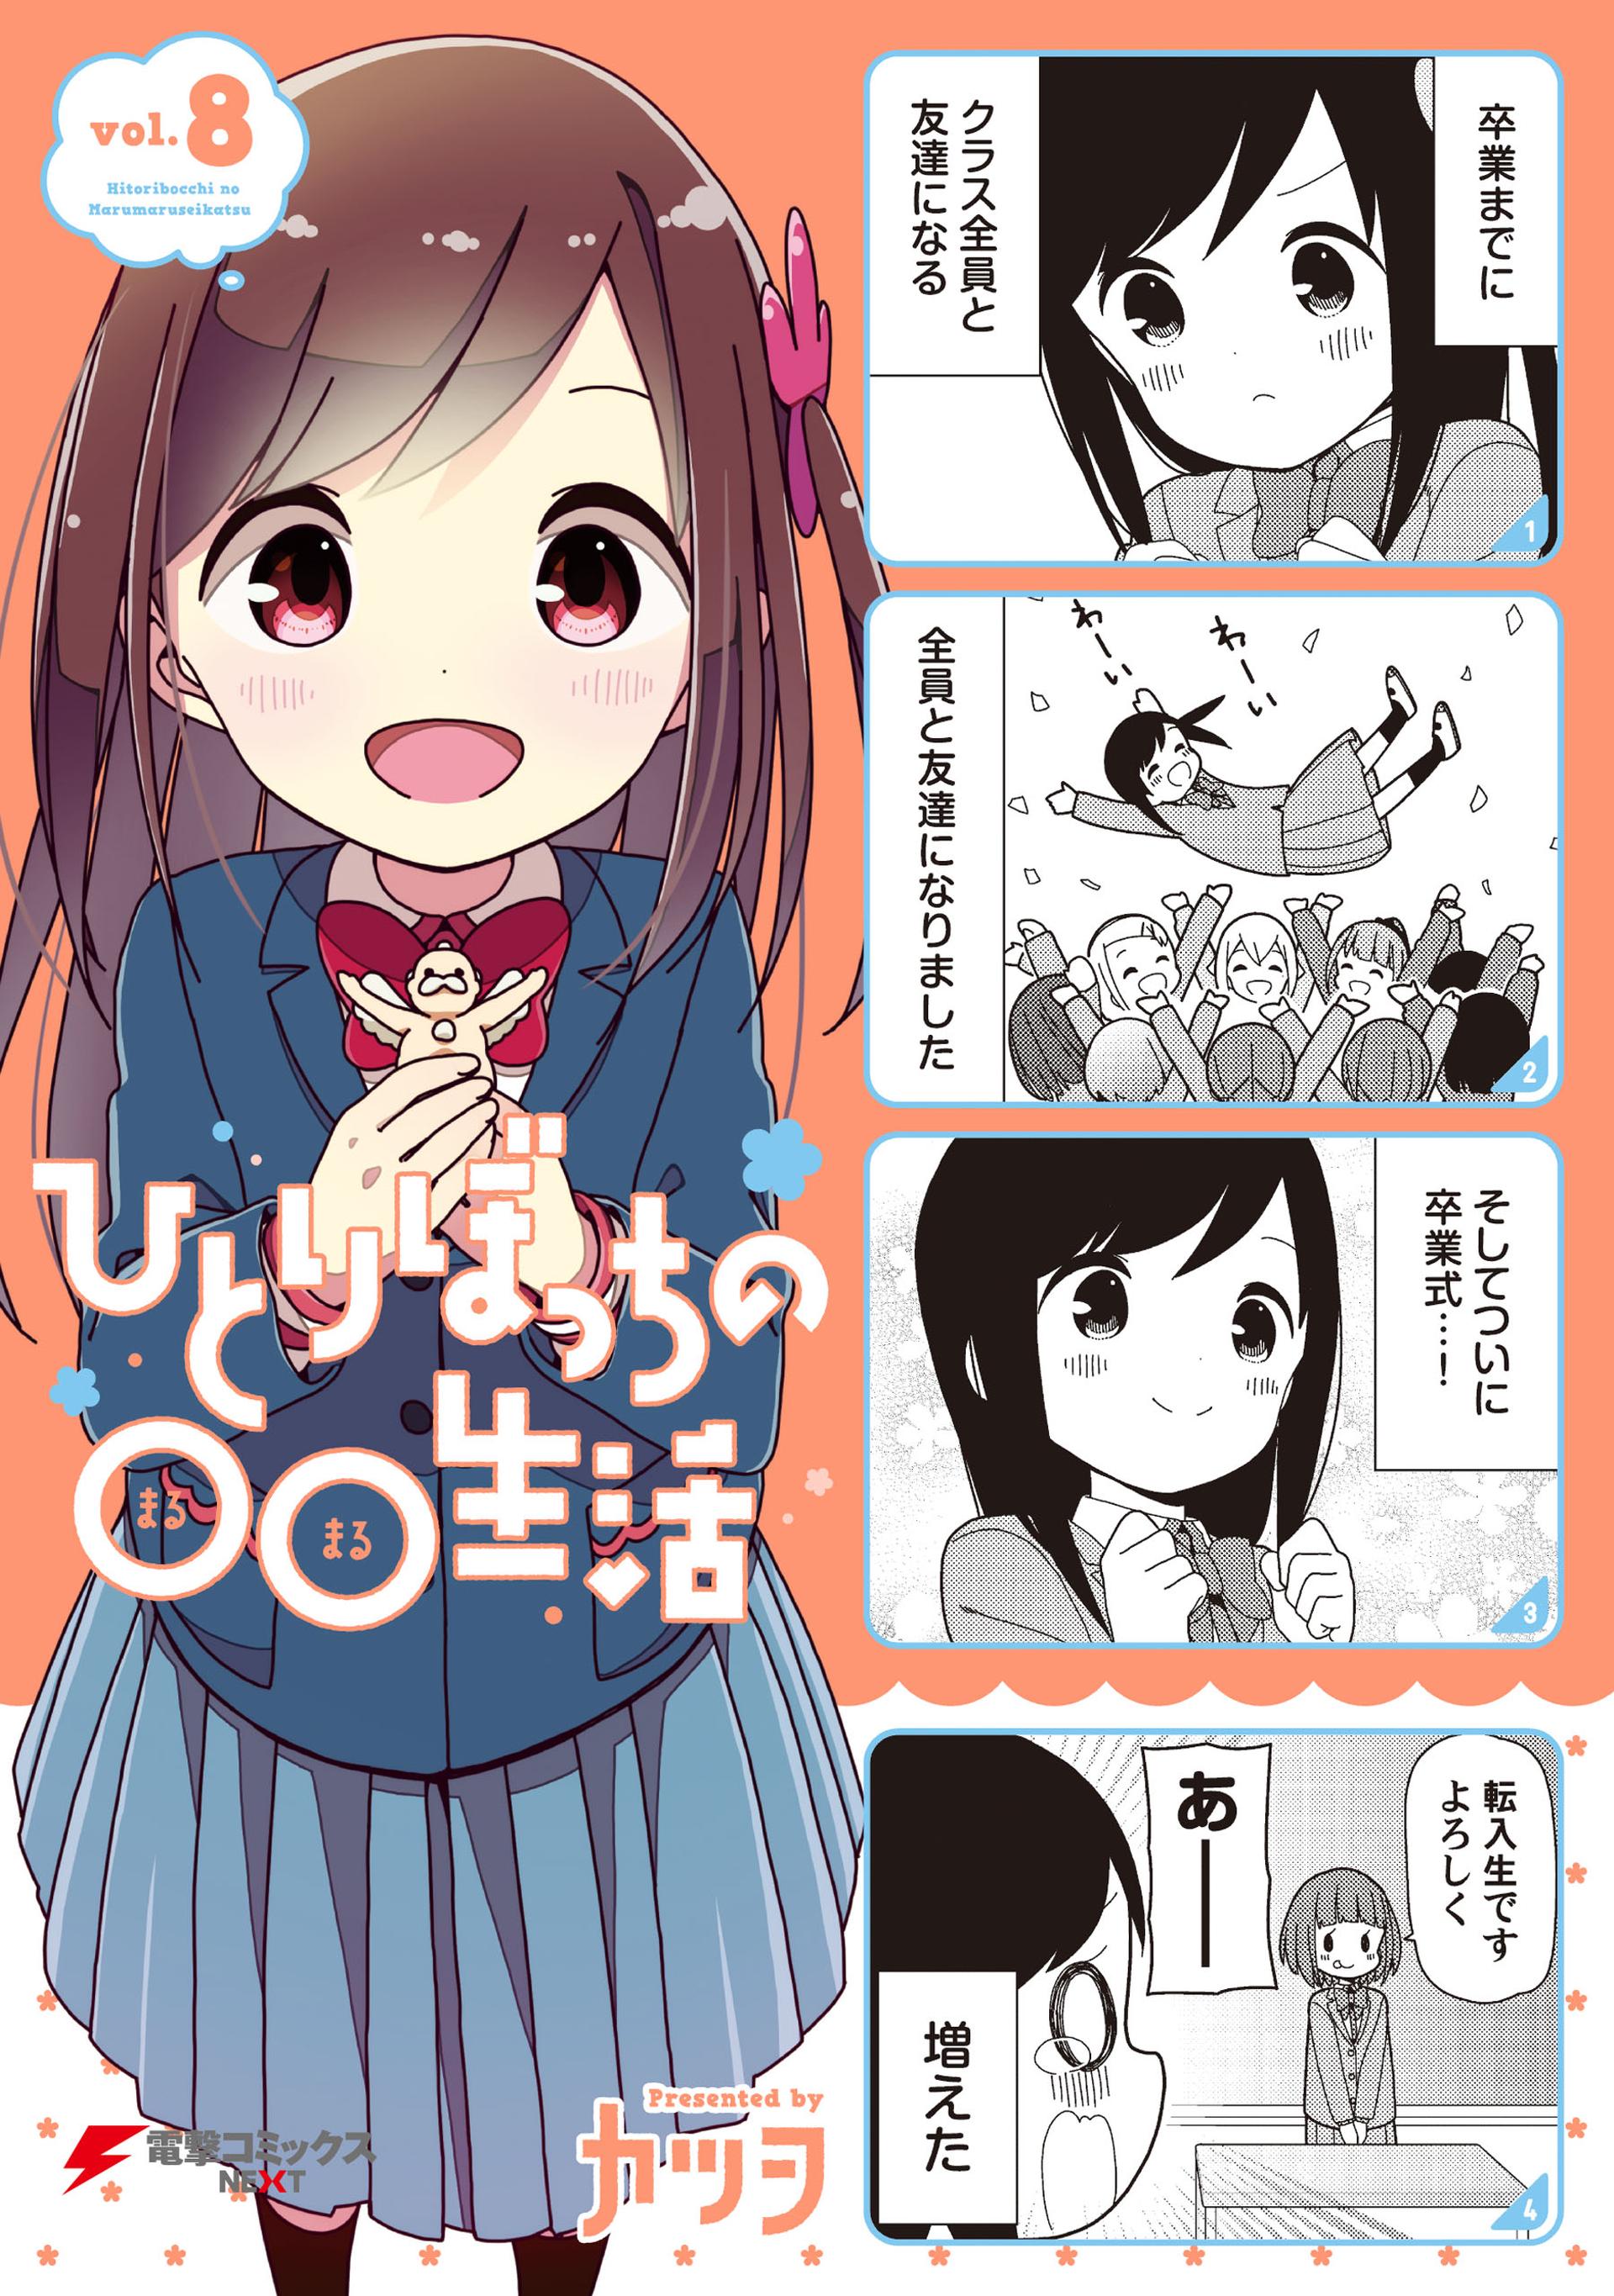 noablender 🦝 on X: Day 13 - Hitori Bocchi Hitoribocchi no ○○ Seikatsu is  equally heartwarming and hilarious, largely thanks to Bocchi herself. Her  insecurities and anxieties are always at absurd, comedic